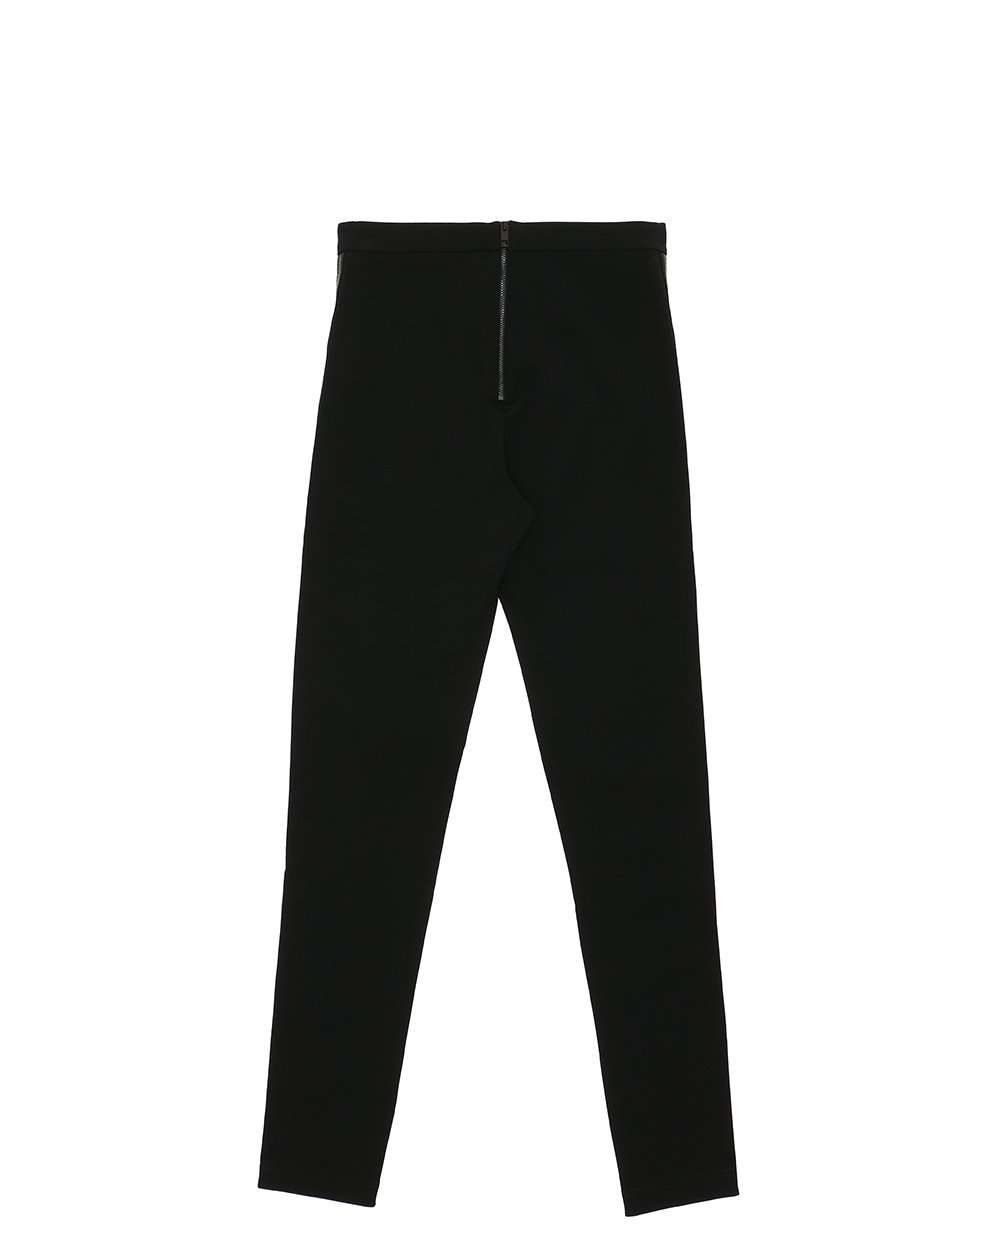 Cotton Trousers - ISSI Outlet